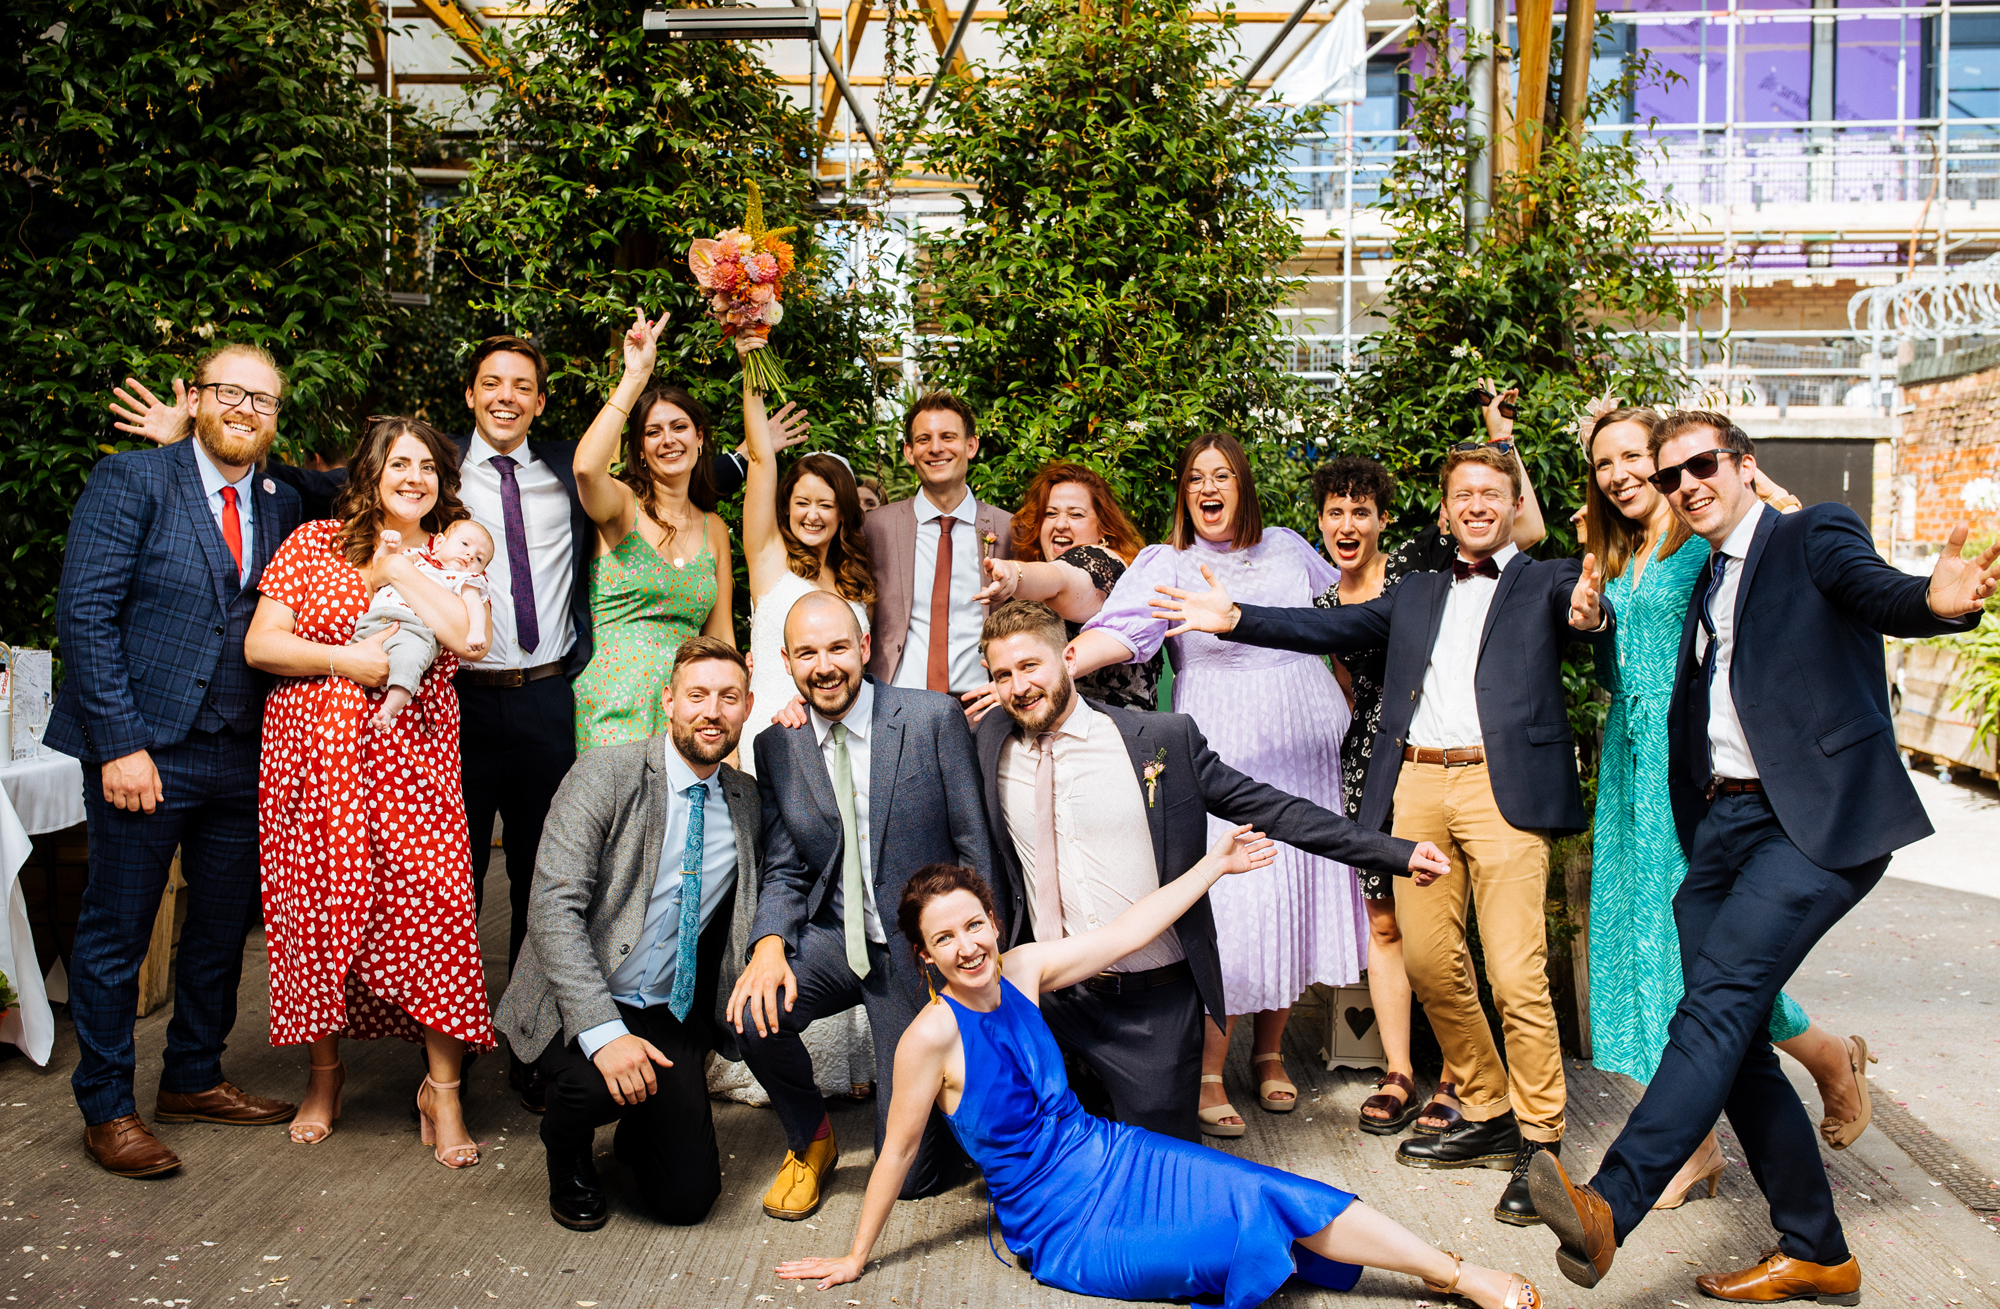 An Urban and colourful wedding in South London